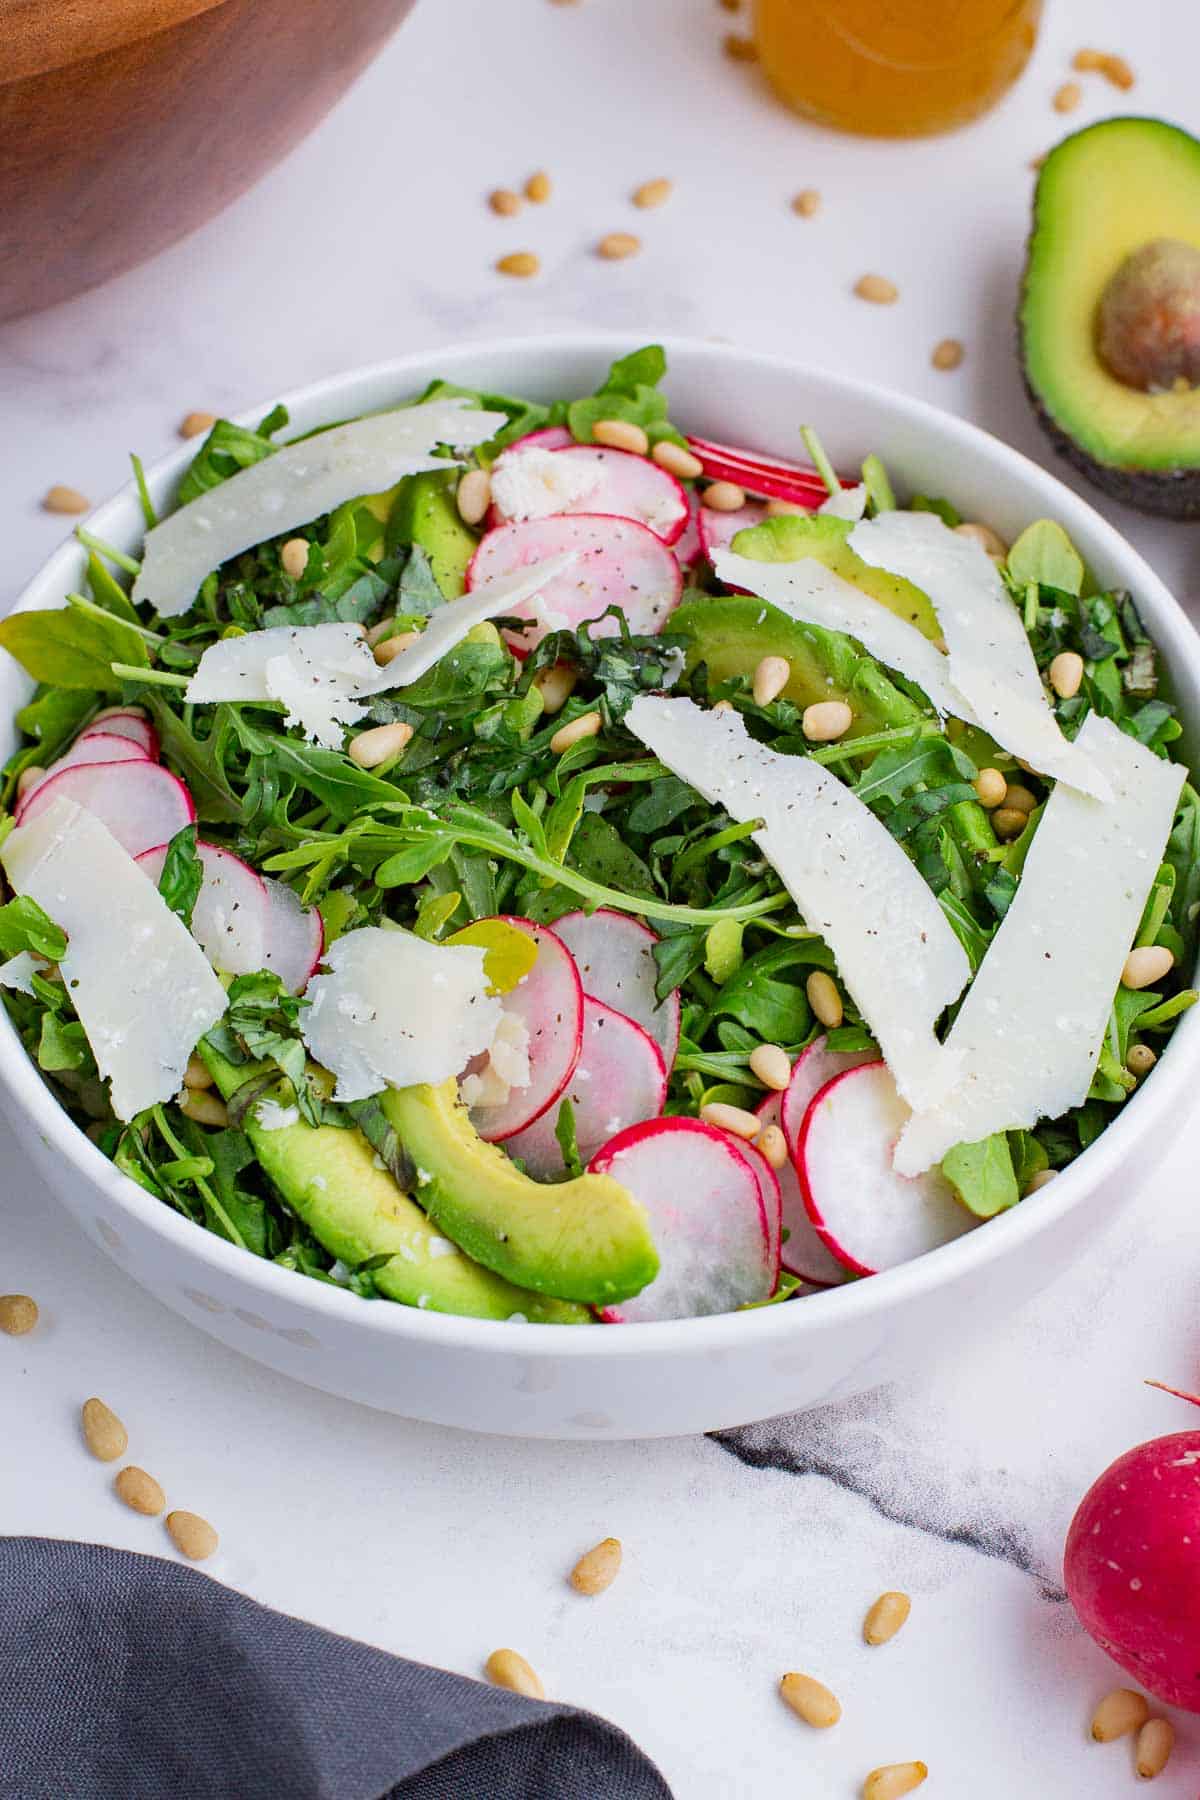 A lemon arugula salad is a healthy side dish the whole family will love.